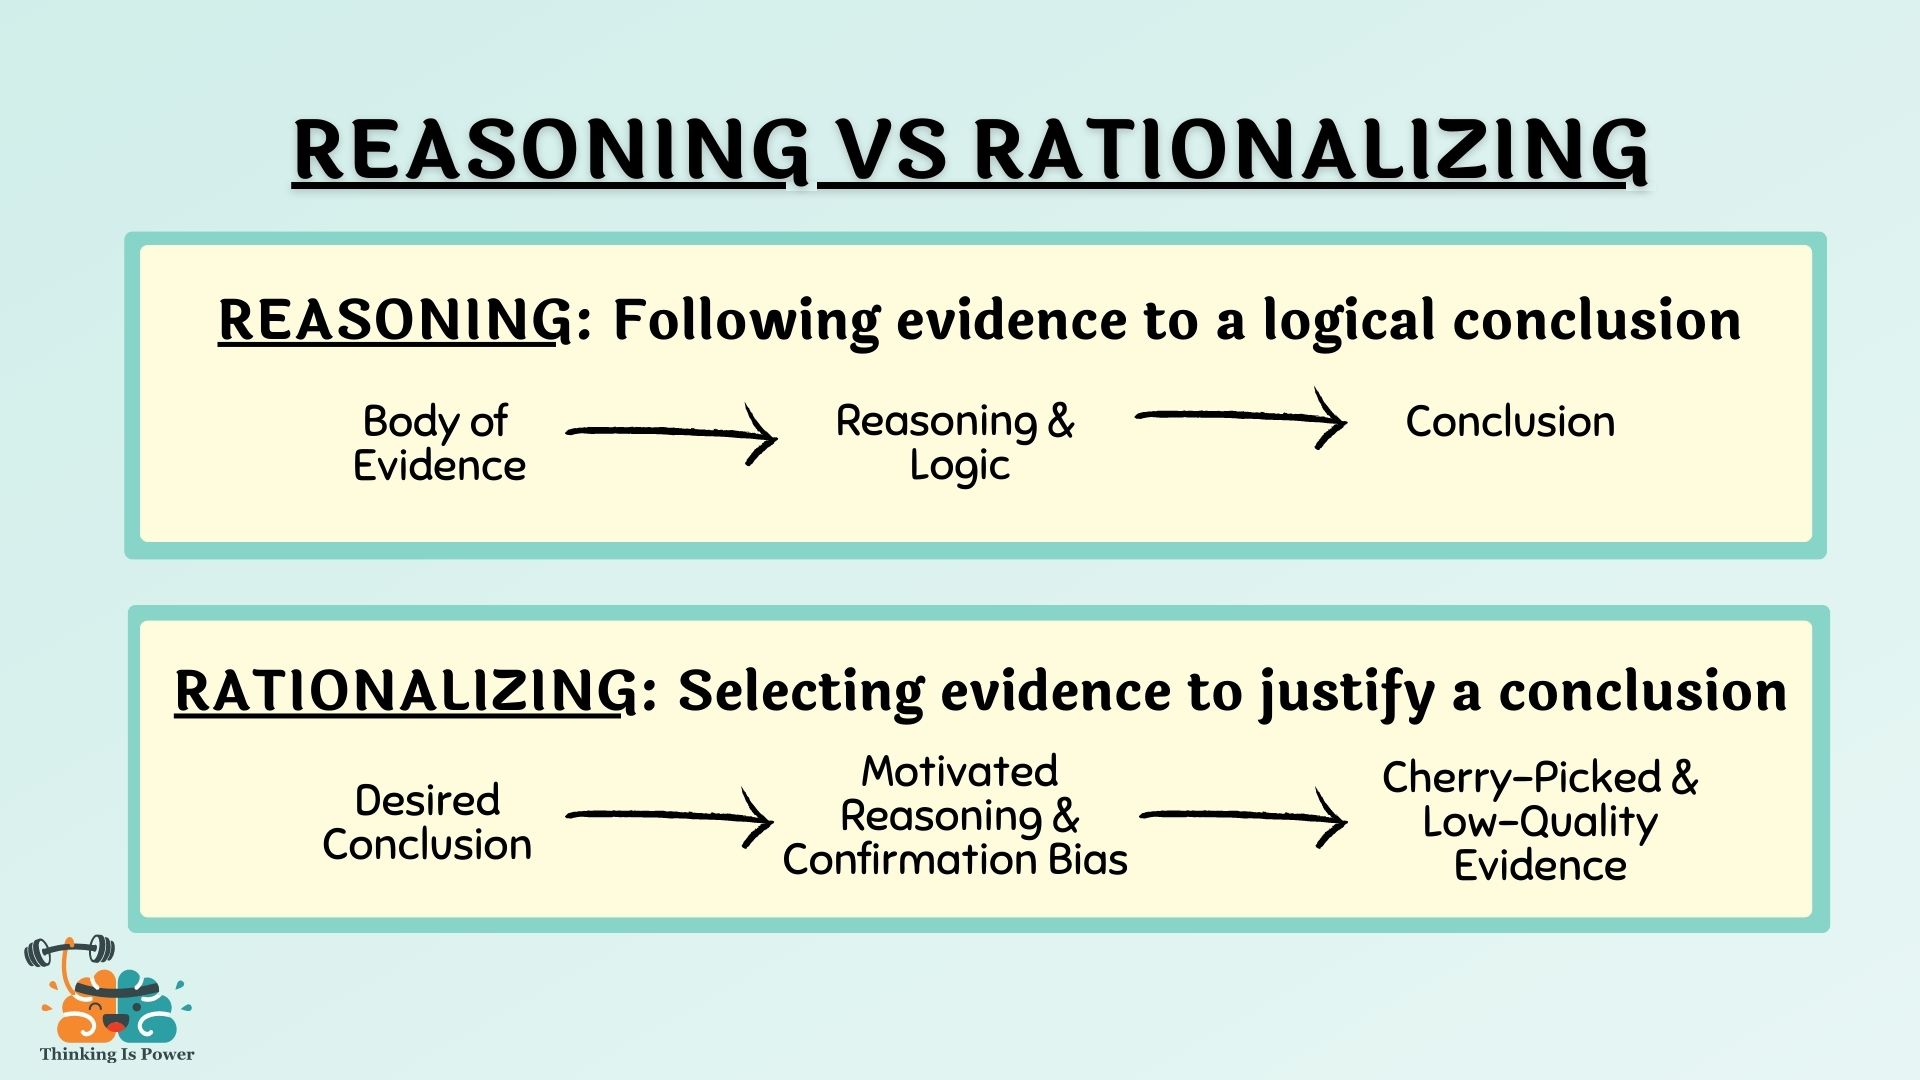 Reasoning is following evidence to a logical conclusion. Rationalizing is selecting evidence using motivated reasoning and fallacies to justify a conclusion